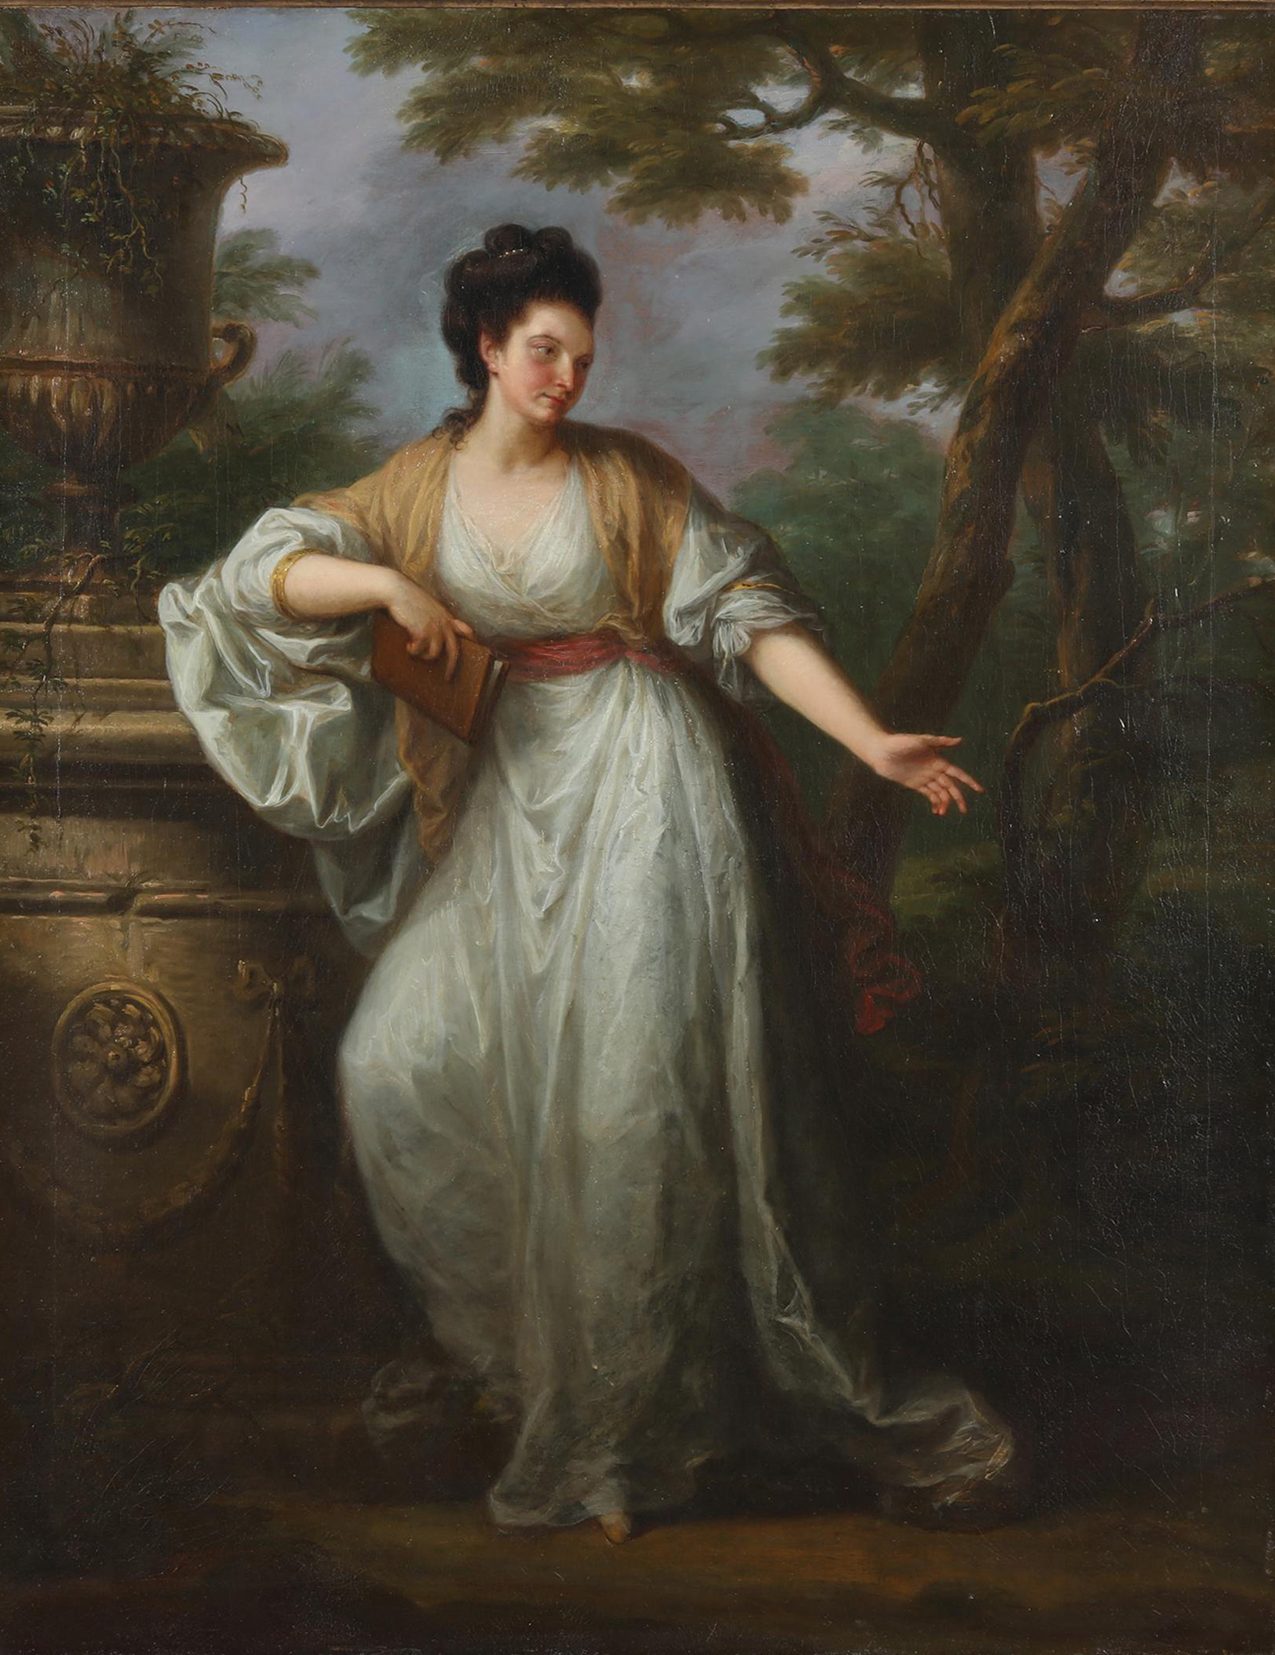 A woman with dark hair, light skin, and a white dress stands by an urn in a garden